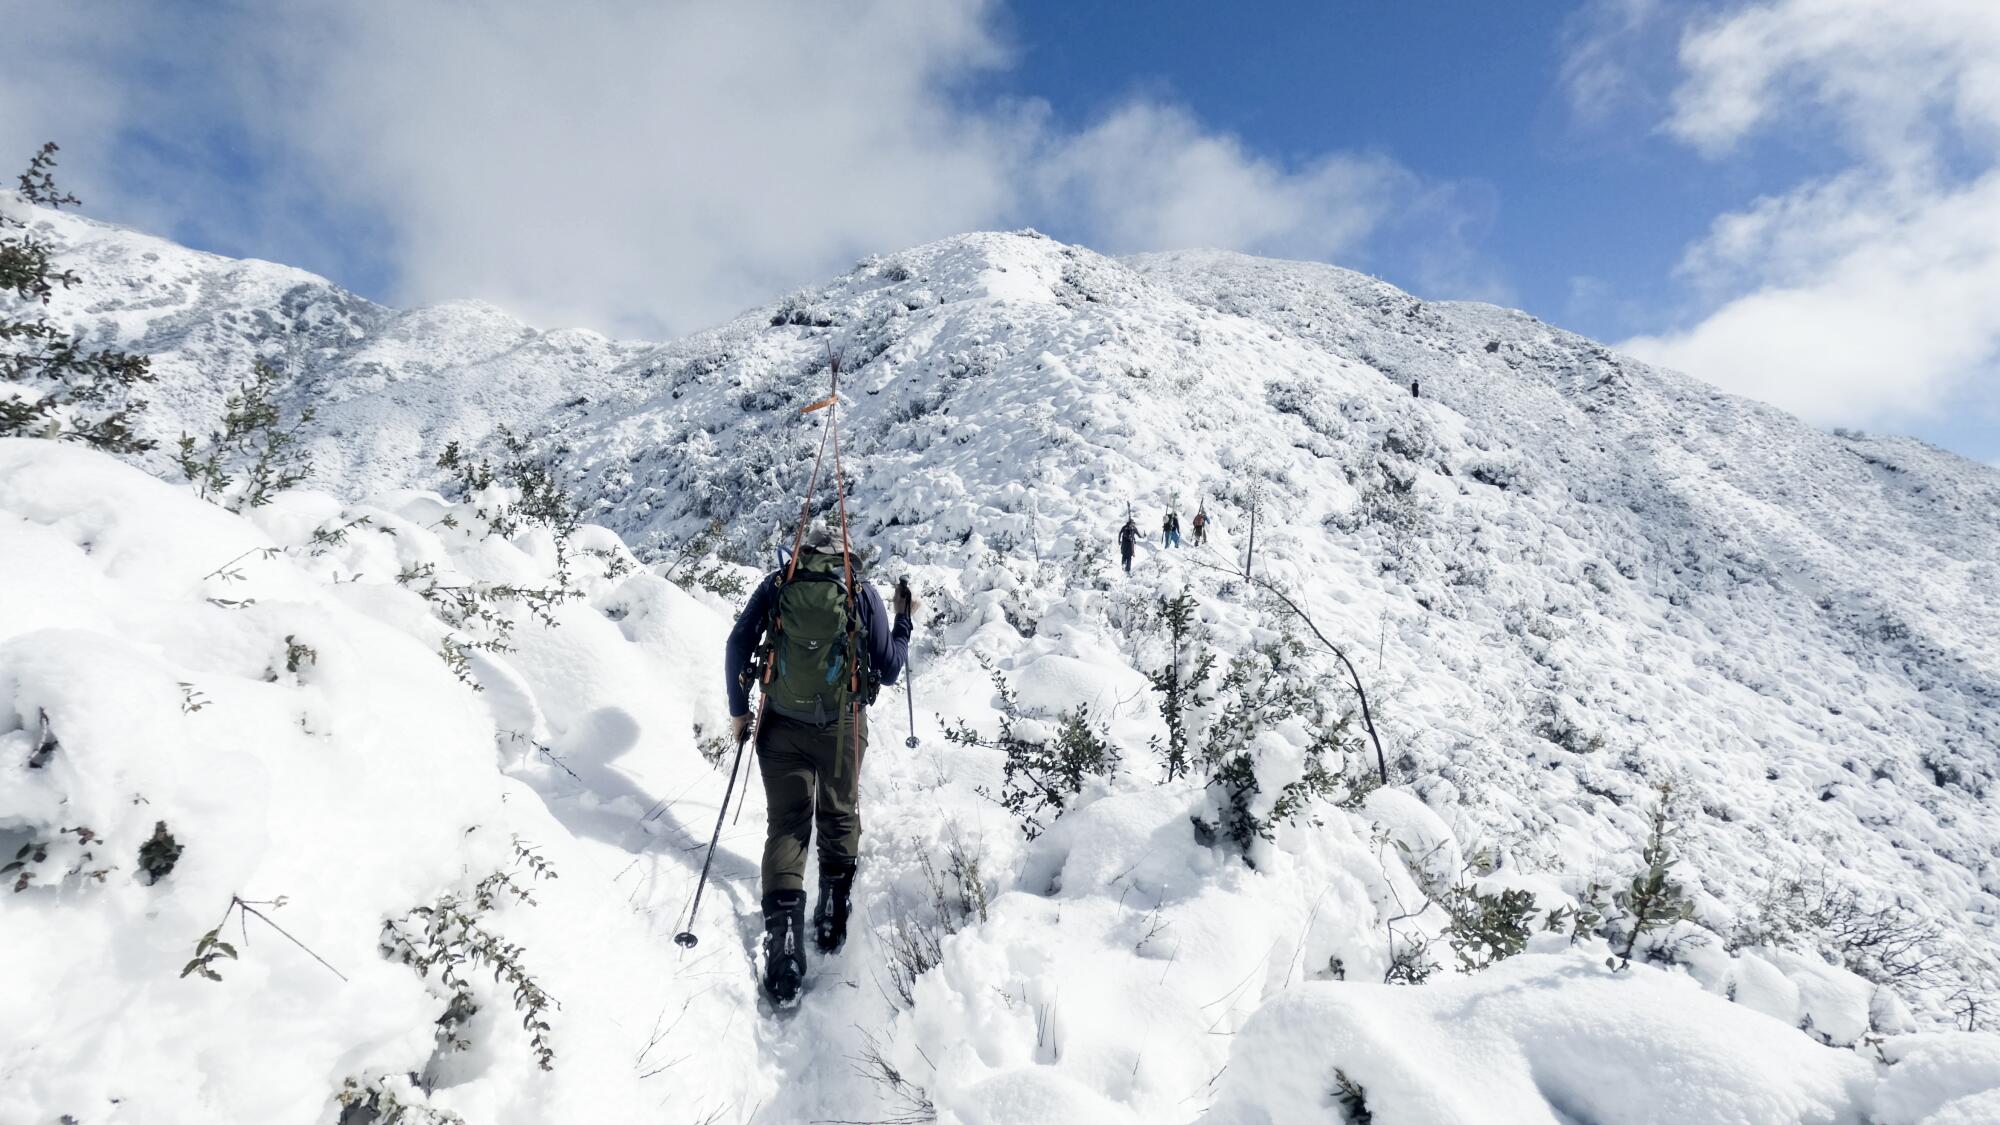 Skiers make their way to the summit of Mt. Lukens.